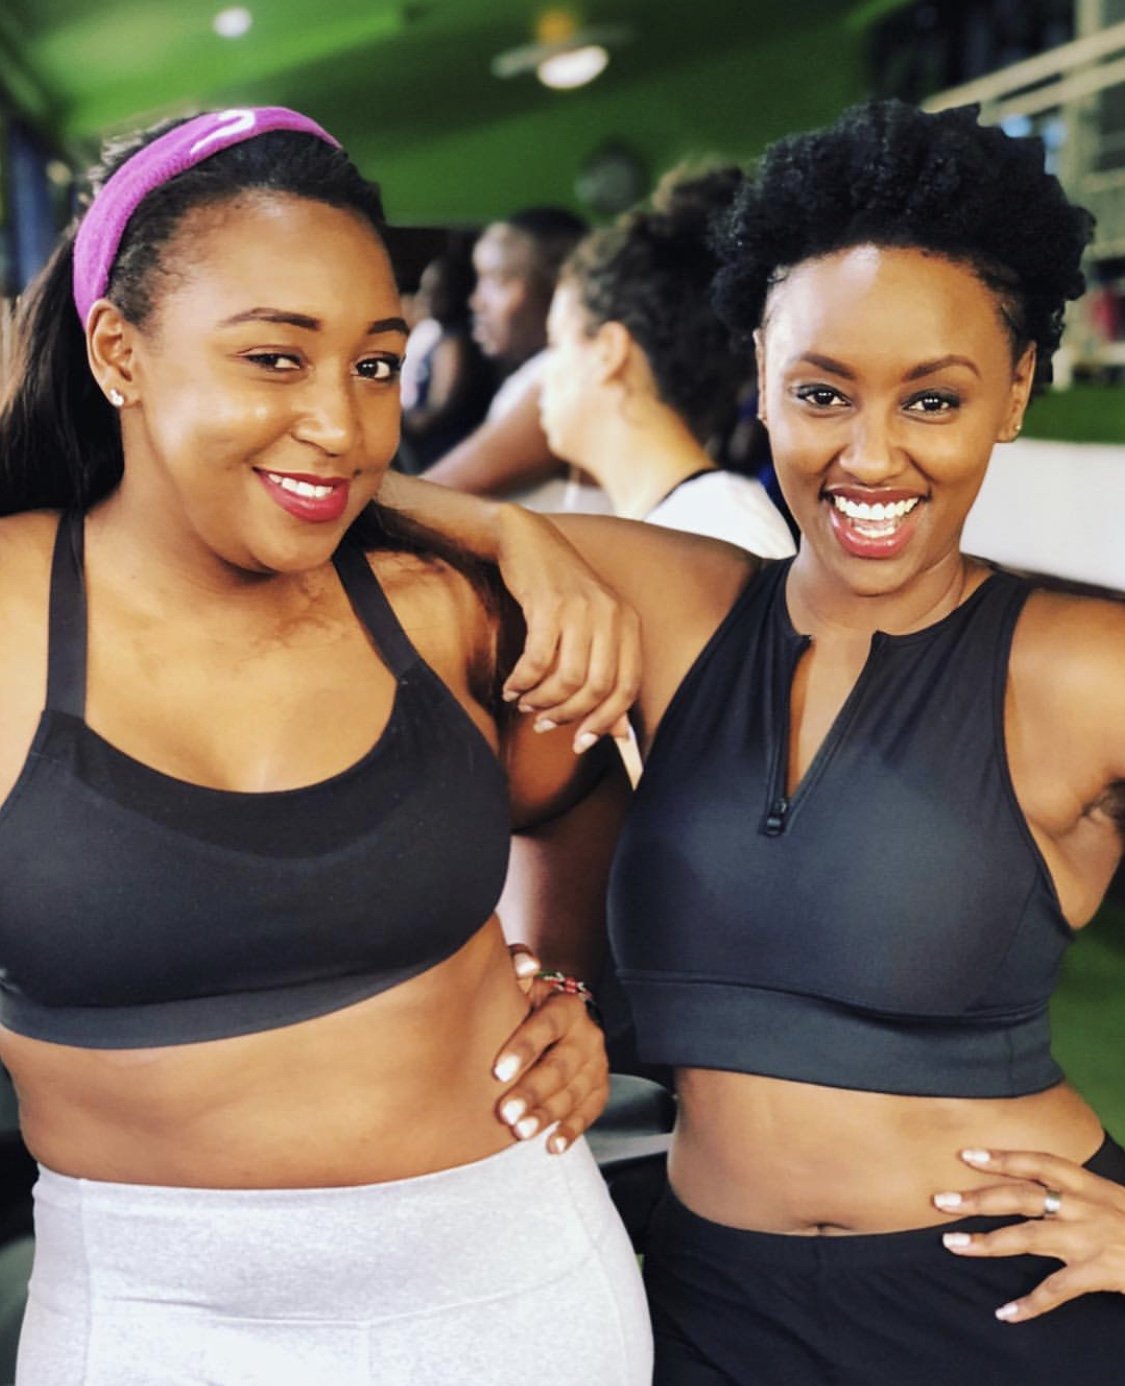 Betty Kyallo shows off her curves while at the gym (Photos)